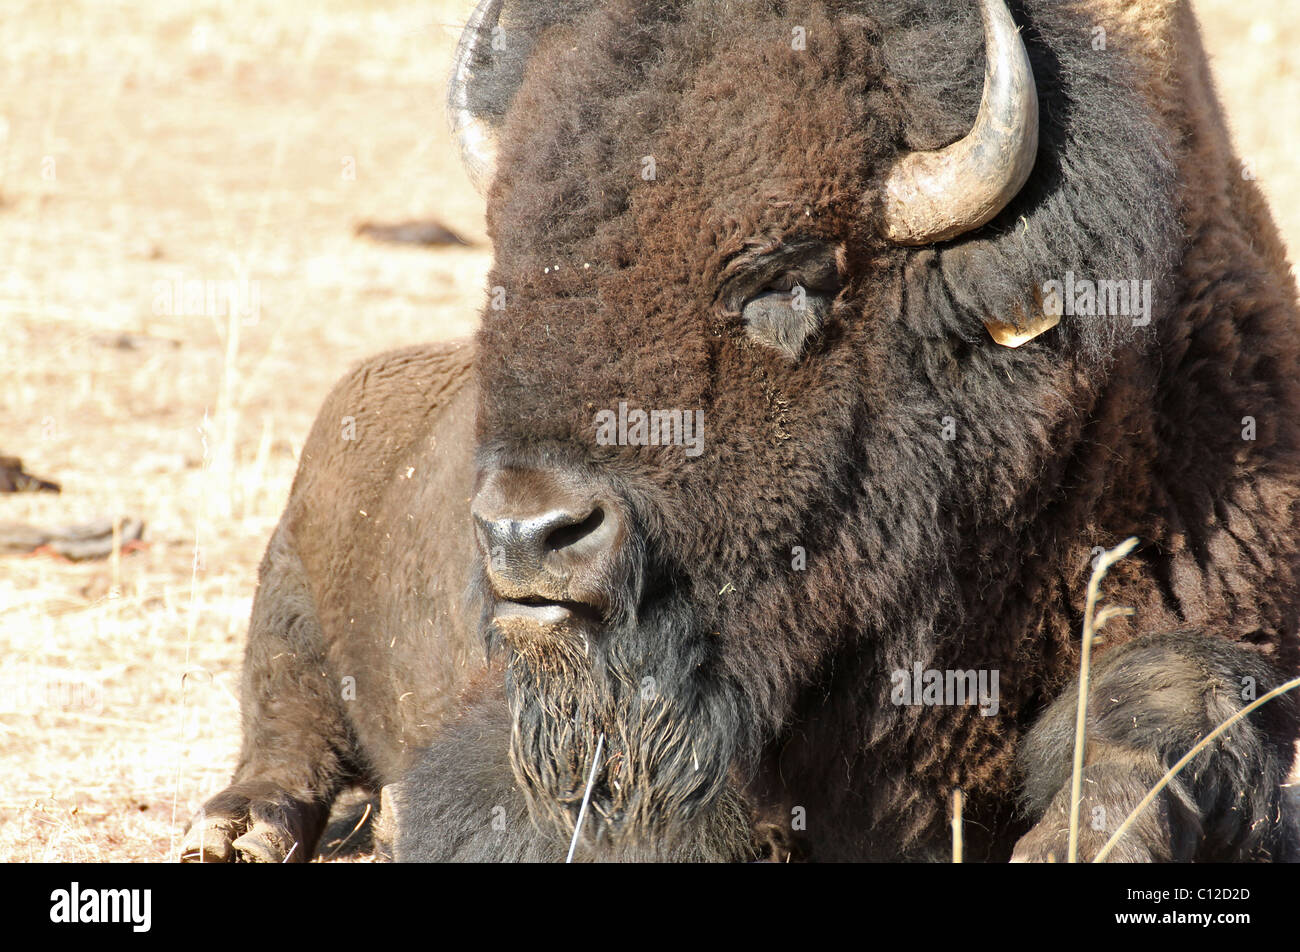 An American bison at a reserve in Colorado Stock Photo